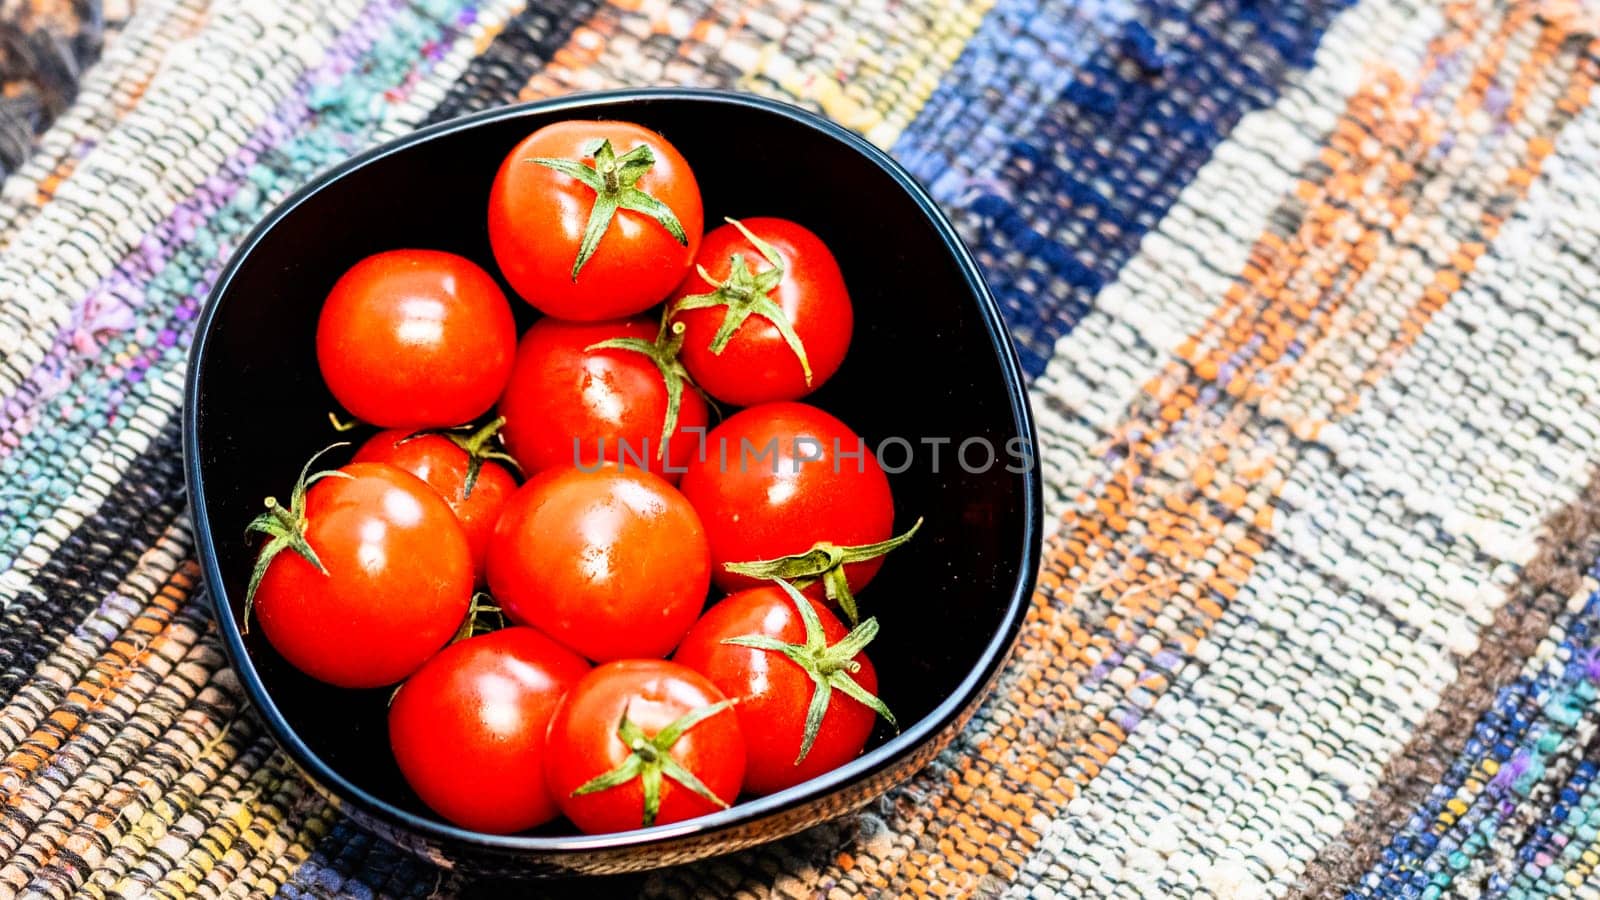 Detail of ripe cherry tomatoes in small black bowl on a rustic napkin. Ingredients and food concept by vladispas